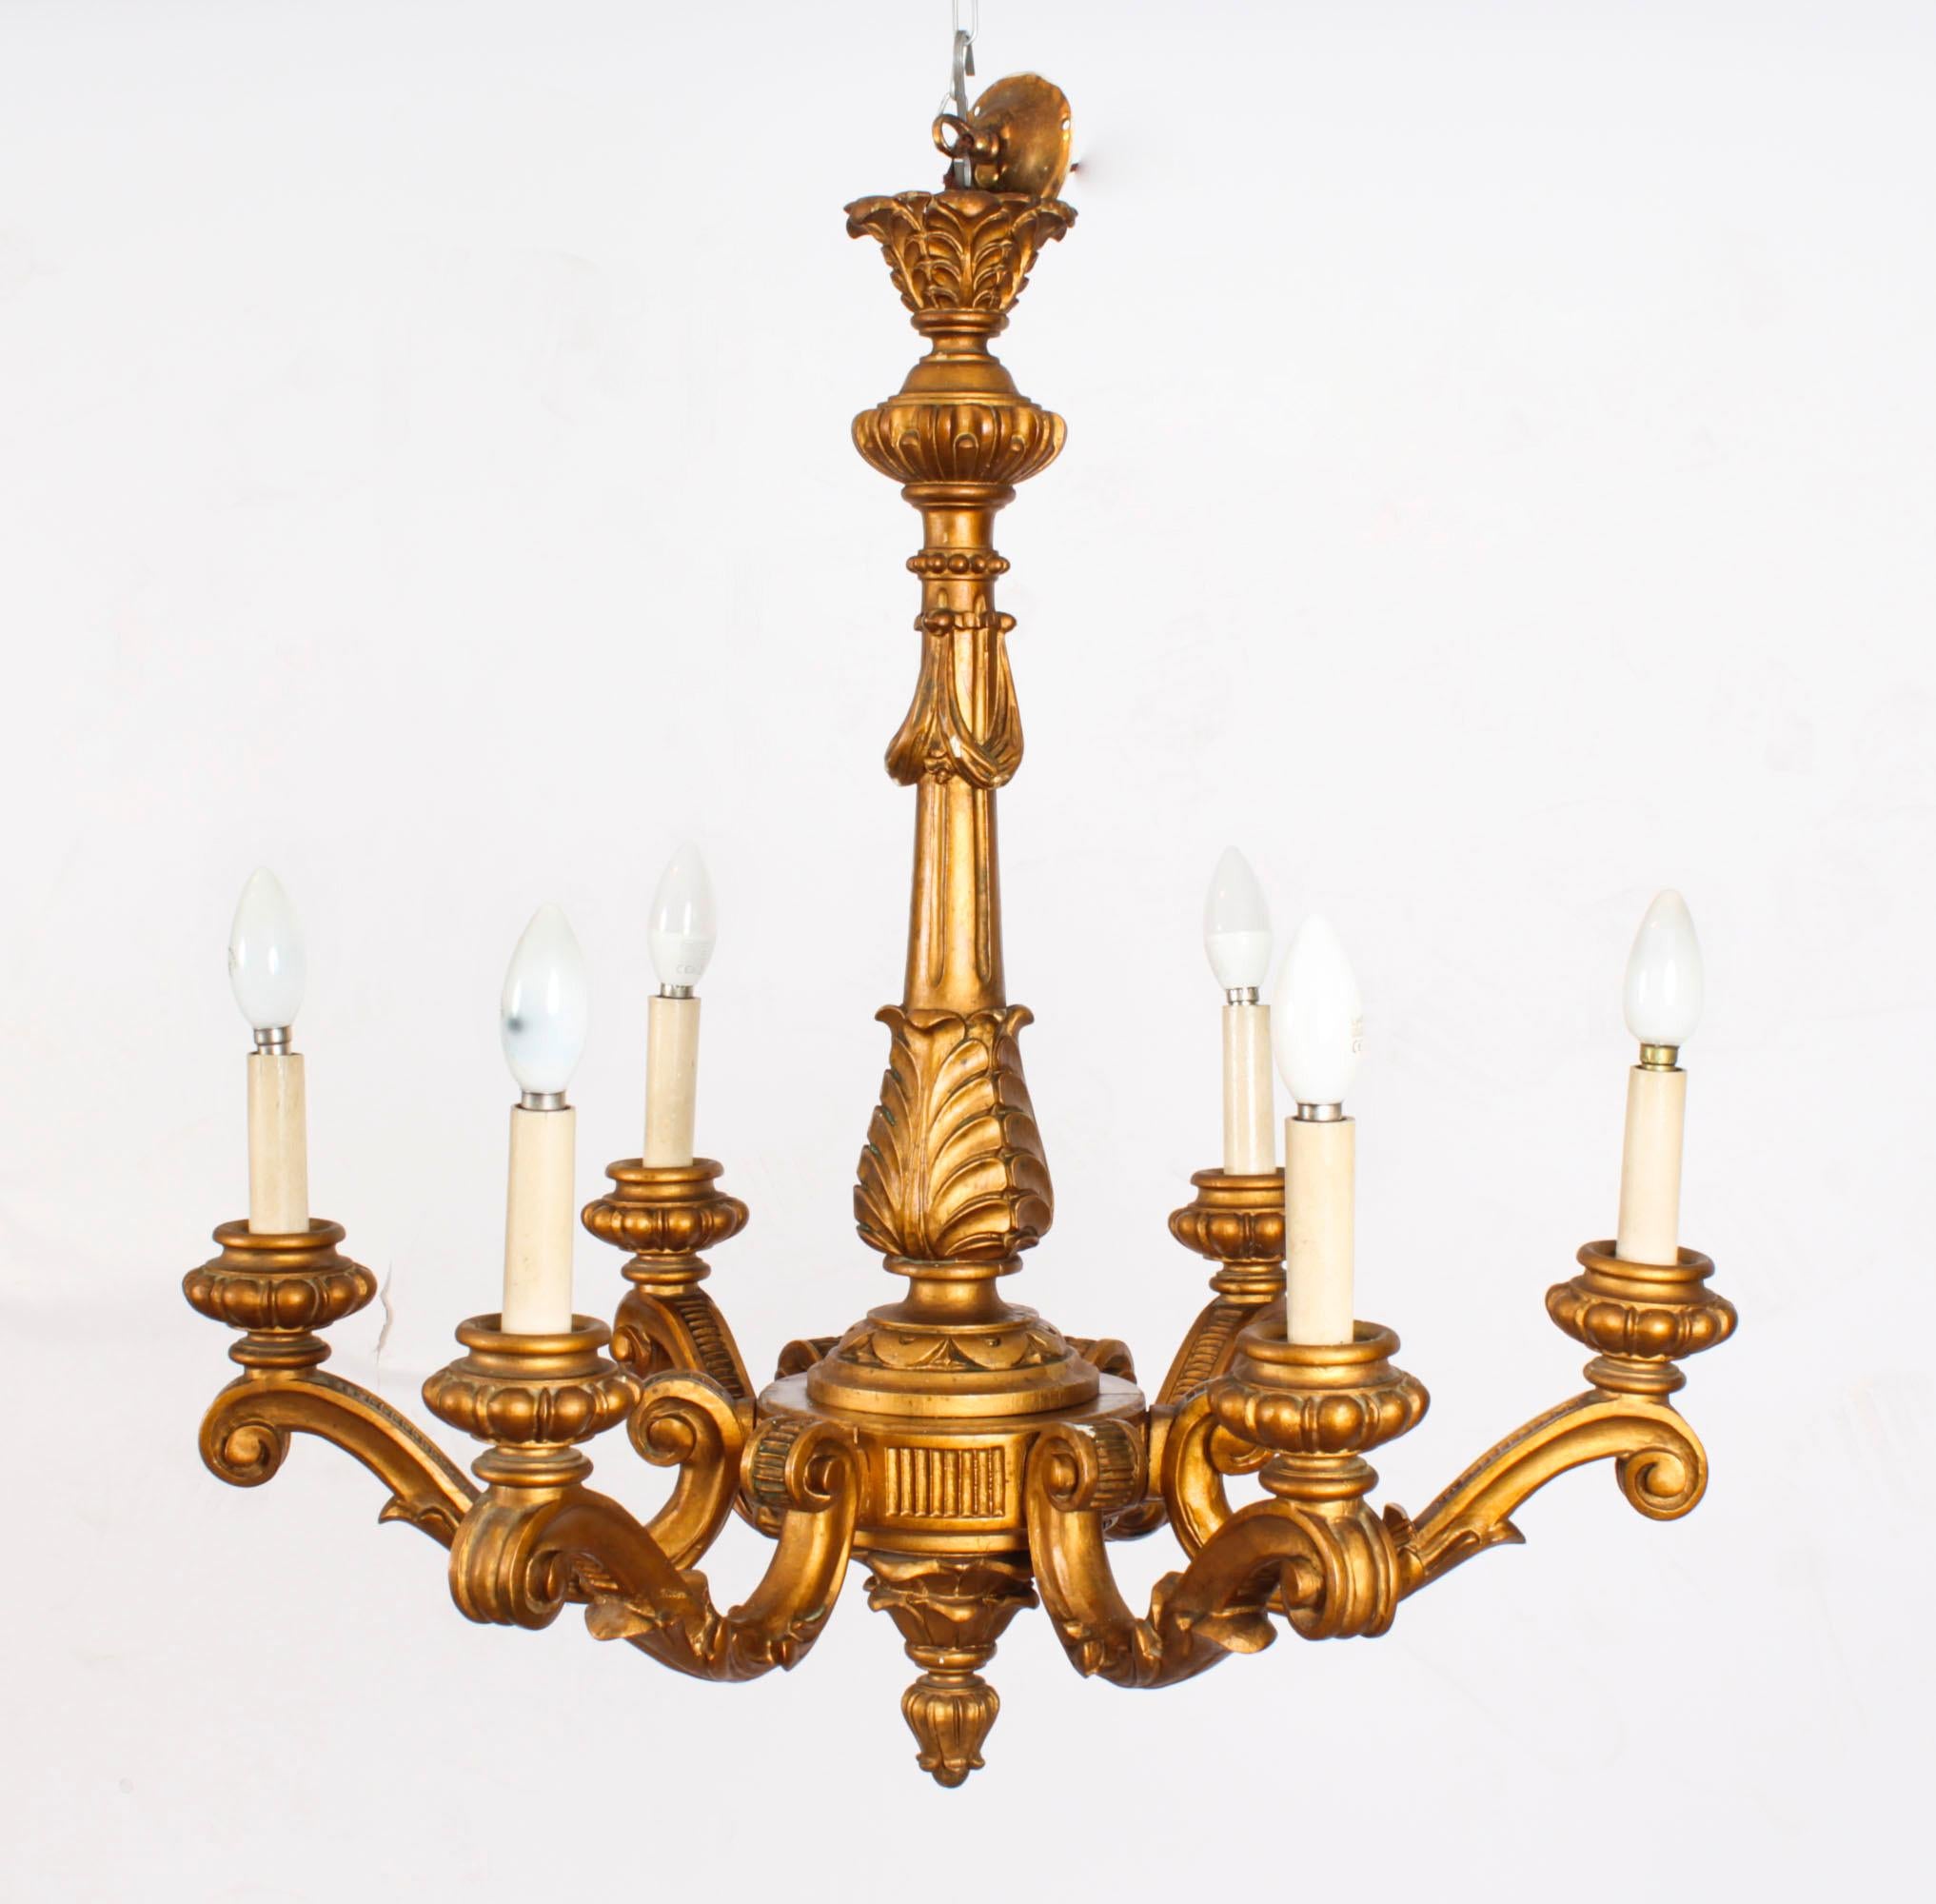 This is a beautiful pair of antique Italian giltwood six light chandeliers, circa 1920 in date.

Each six-arm giltwood chandelier is elaborately carved in the Rococo style.

These chandeleirs will look equally good with small pretty clip on shades